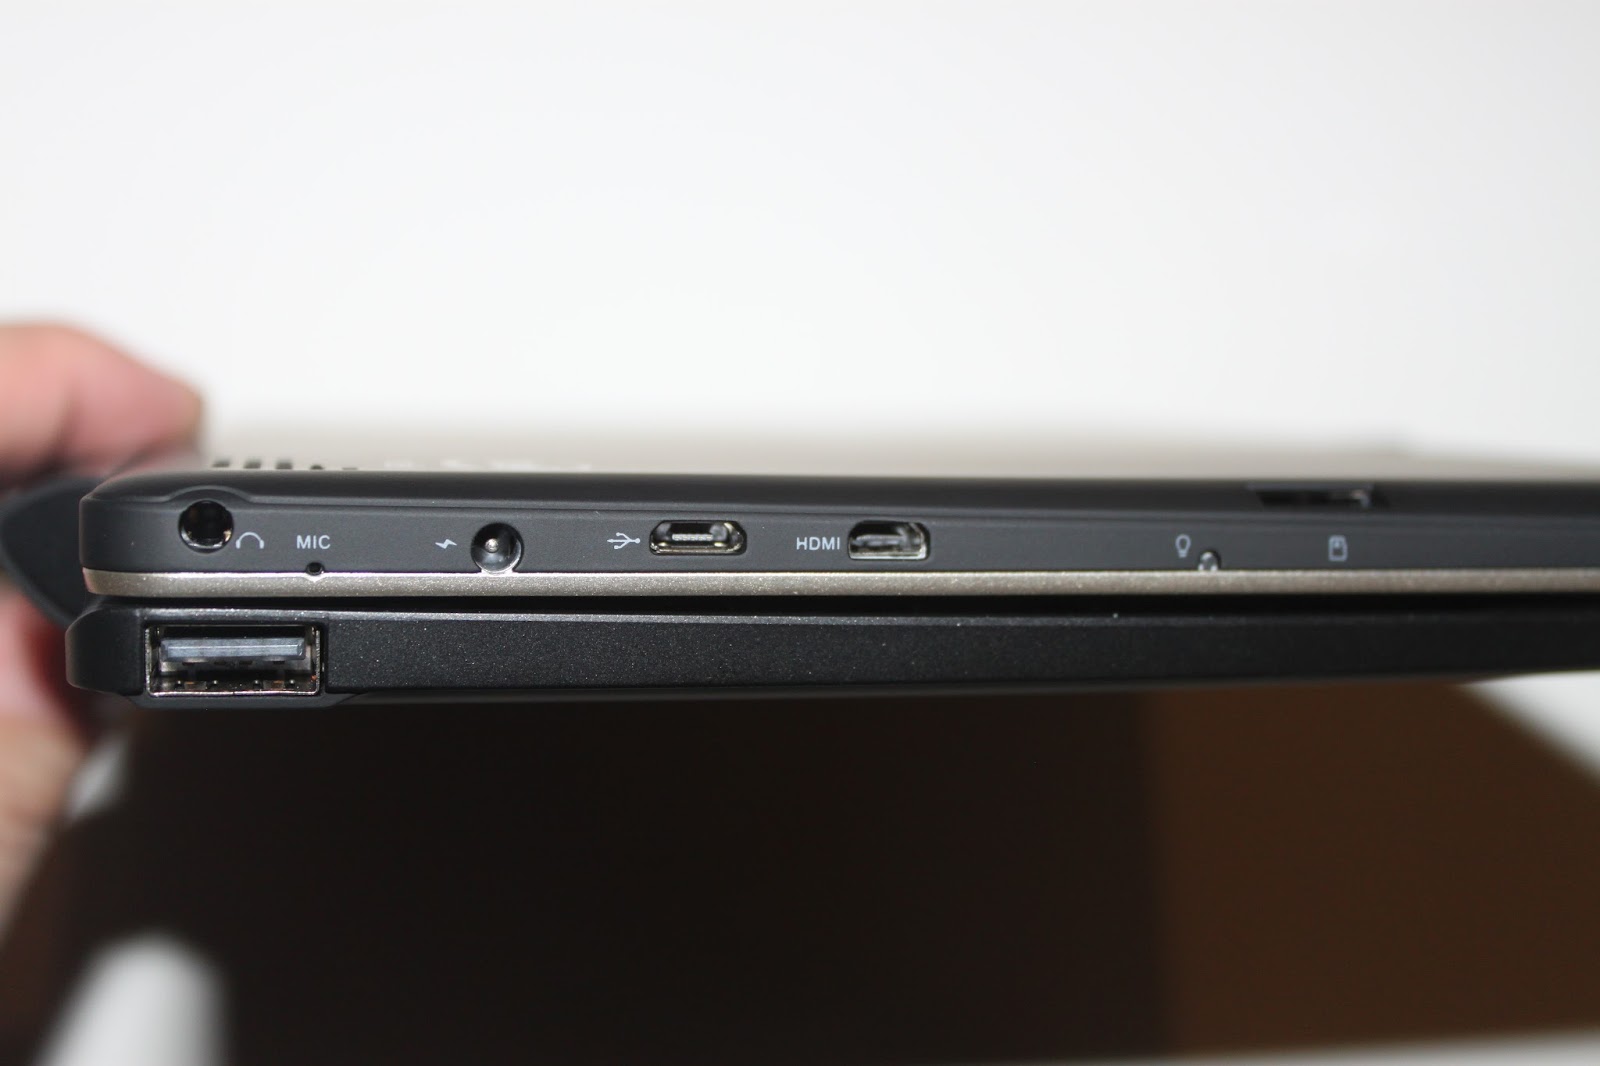 Stereowise Plus: Nextbook Flexx 10 Quad-Core 10.1" 2-in-1 Tablet Review